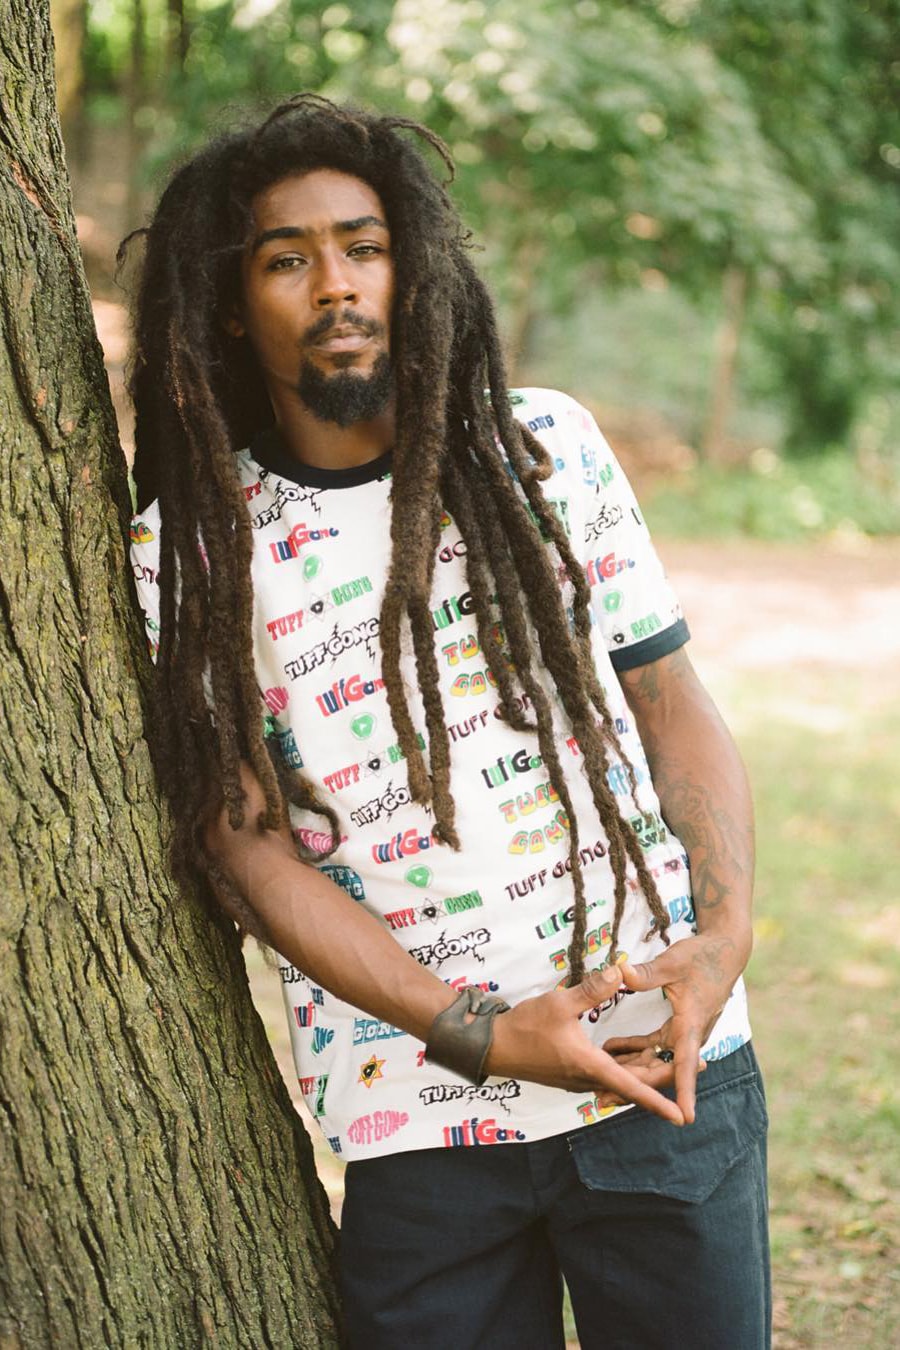 noah nyc tuff gong collaboration fall winter 2018 tee shirts hoodie jamaica print logo recording studio family september 13 2018 release date drop info buy shop purchase sell sale